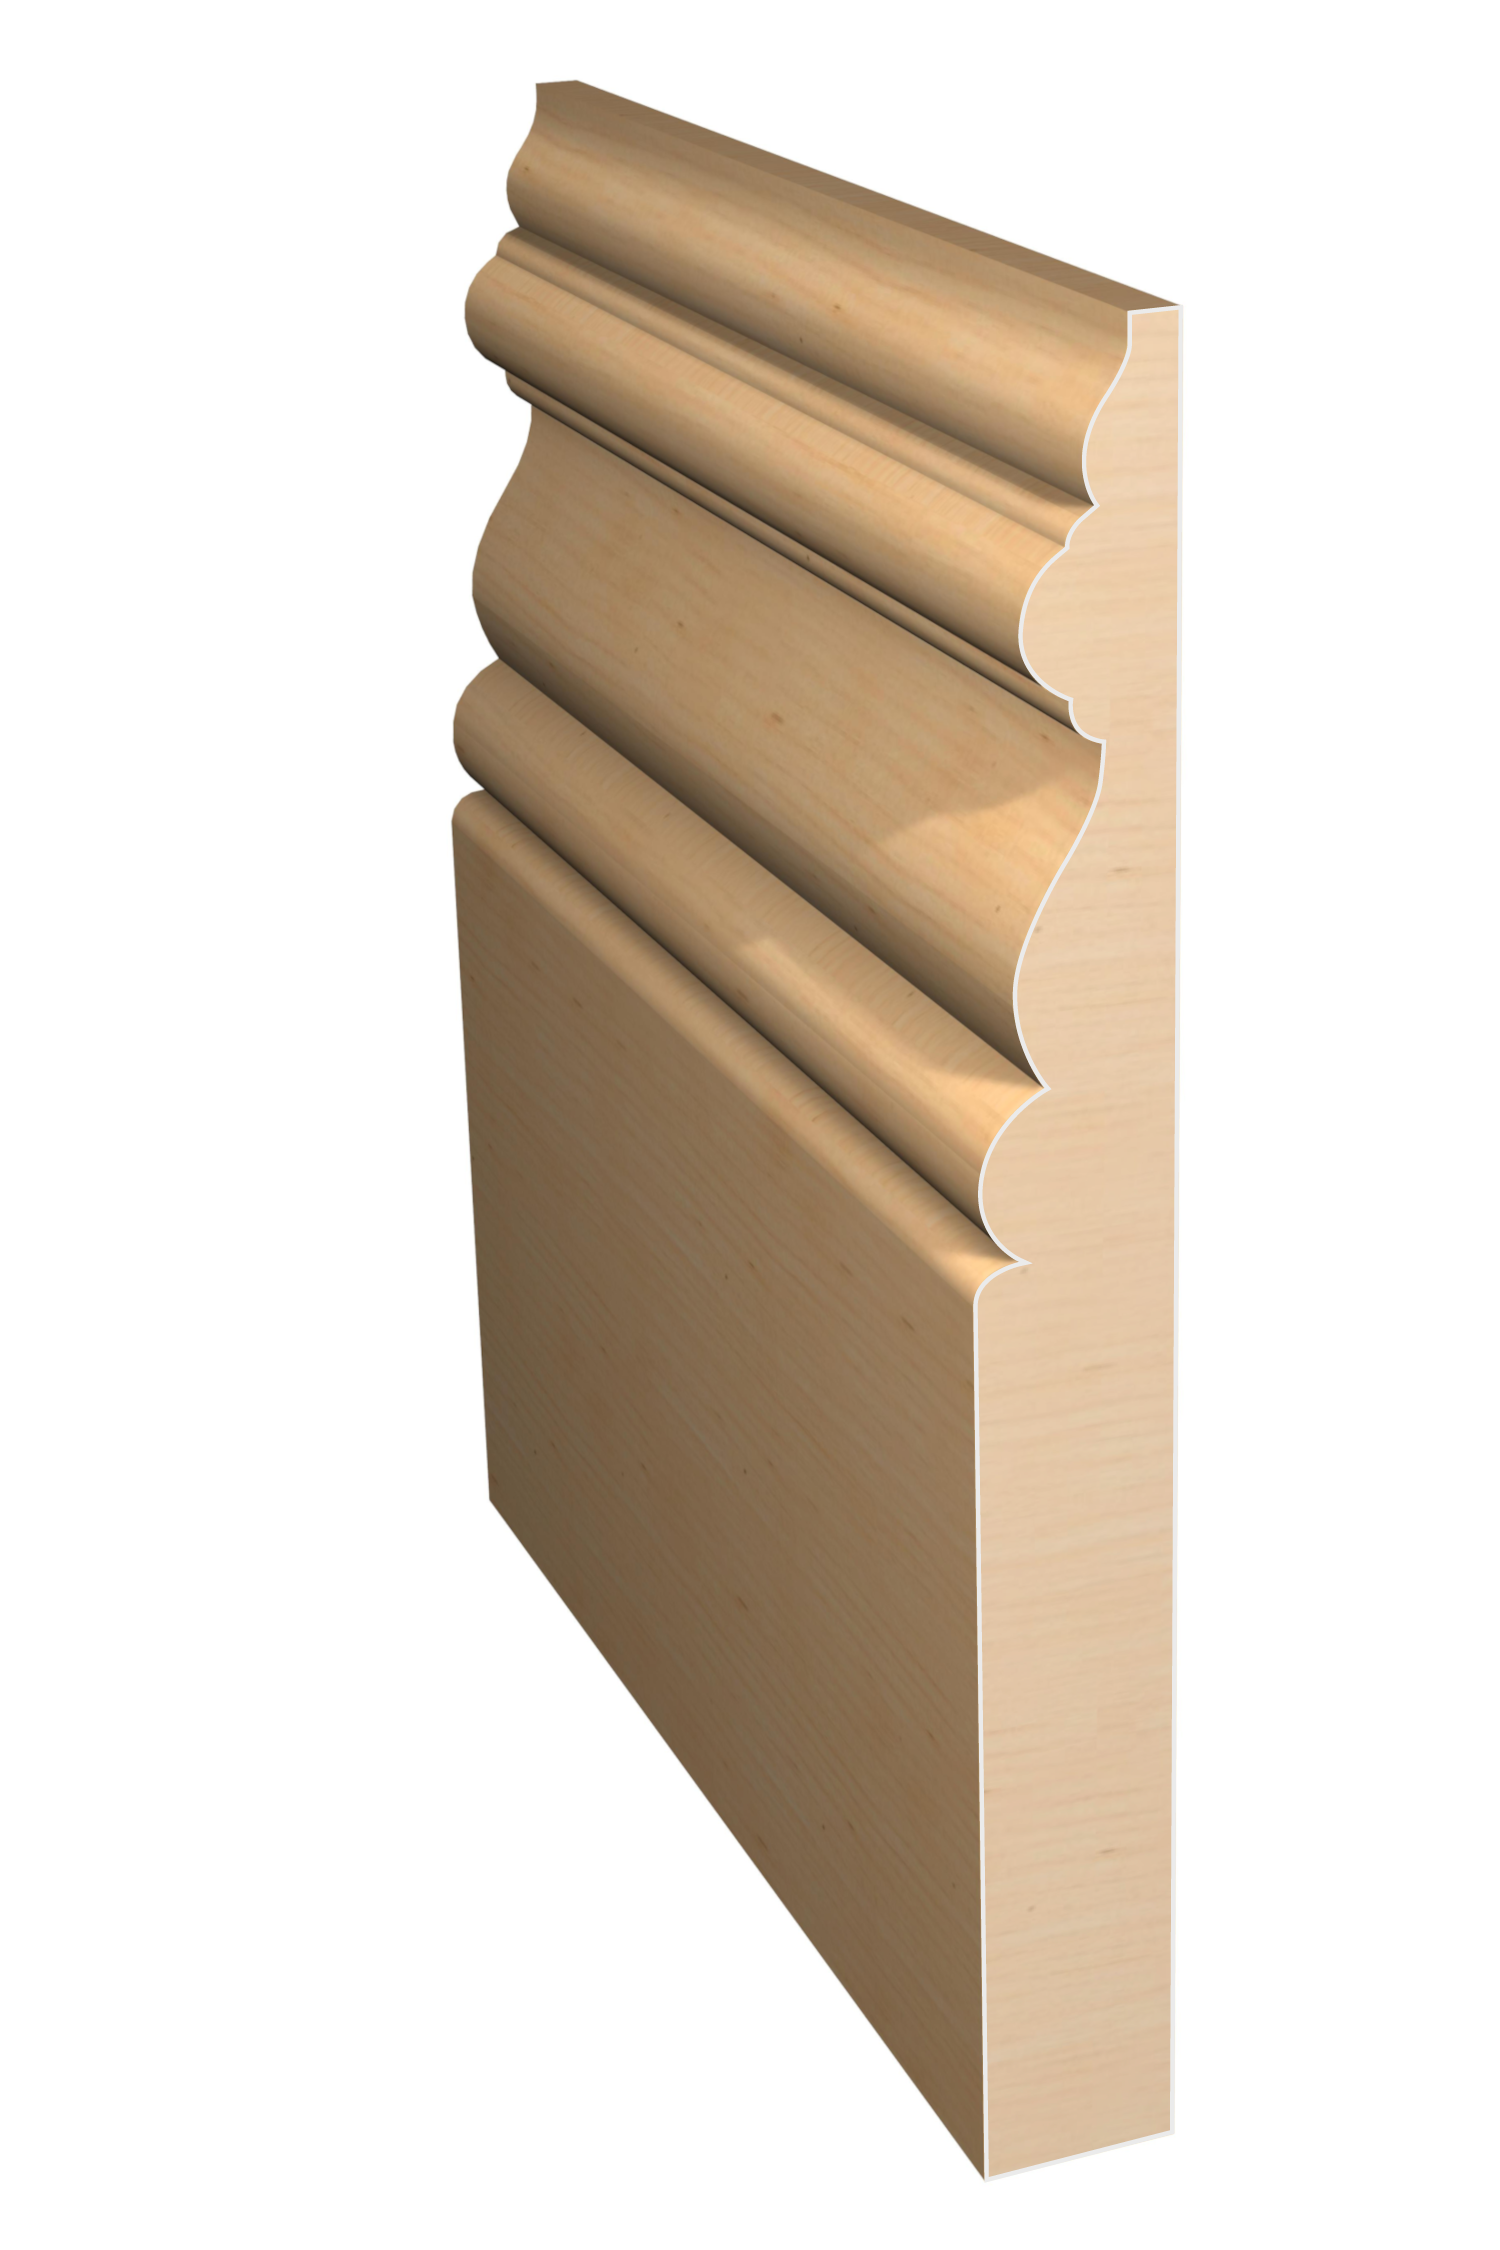 Three dimensional rendering of custom base wood molding BAPL7141 made by Public Lumber Company in Detroit.